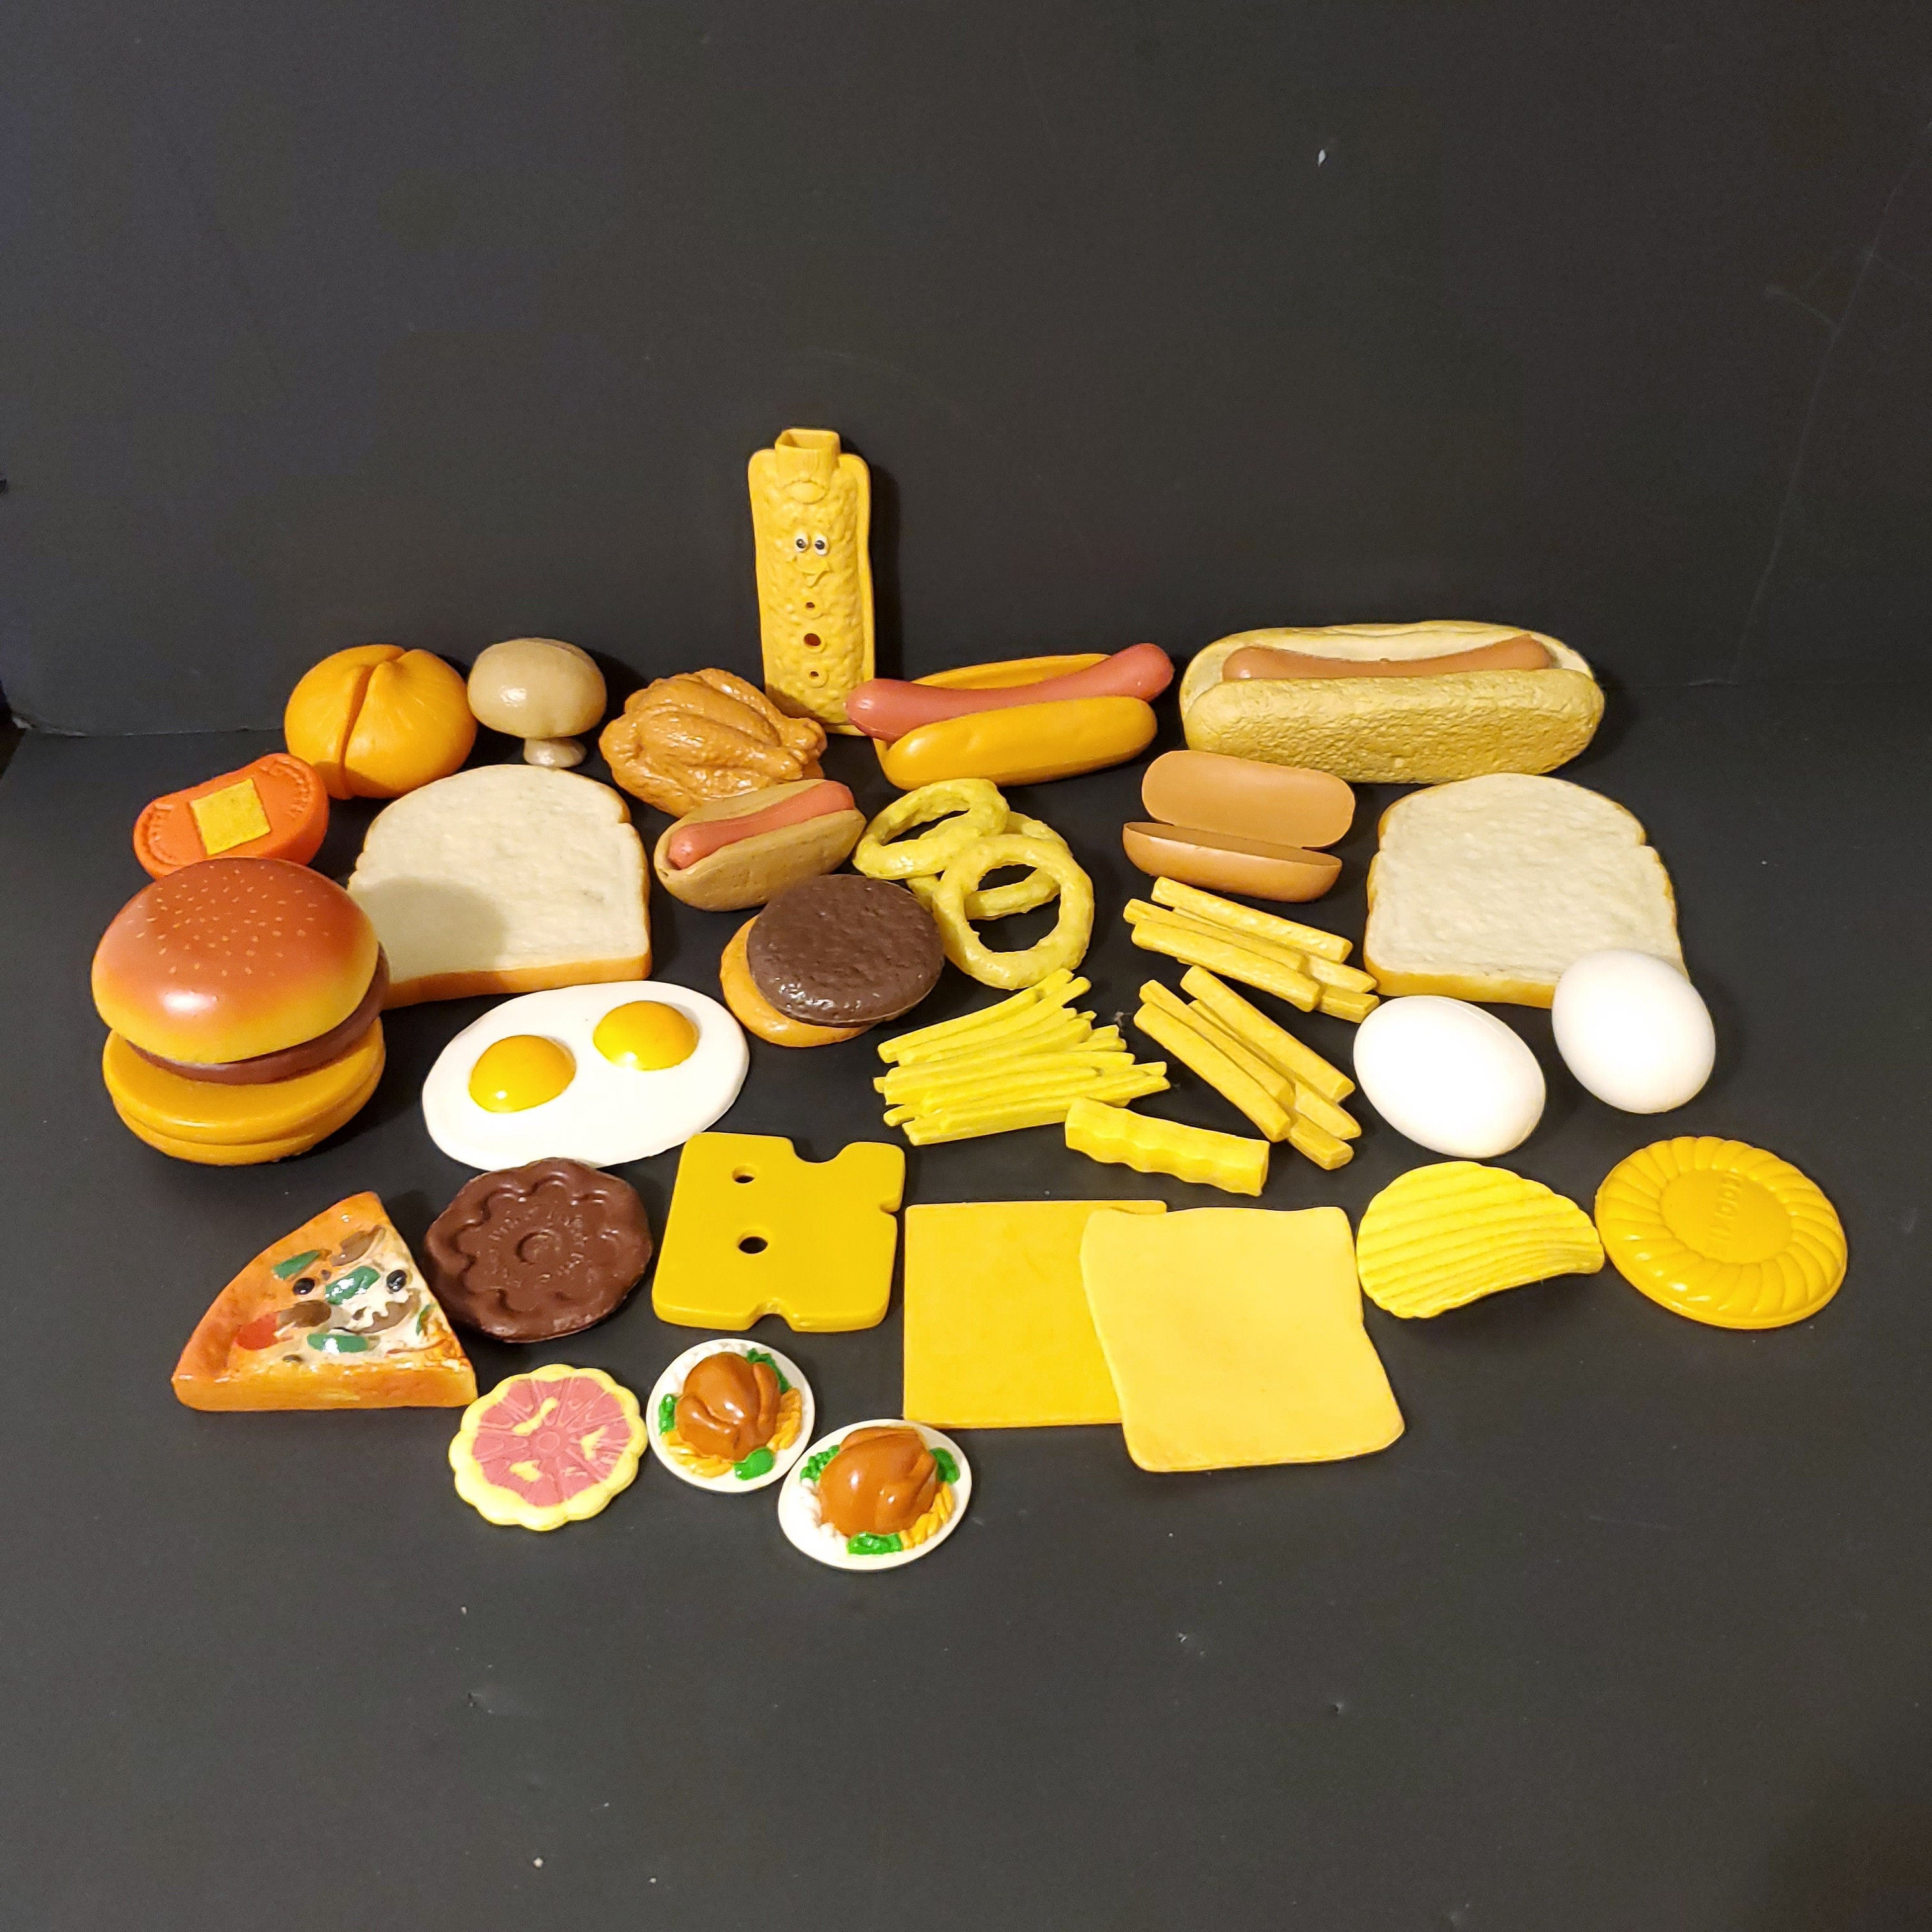 12 Play Food Toy Plastic Pretend Kitchen Baking Cooking Dessert Hot Dog  Carrot Vegetable Fruit Strawberry Banana Craft Assemblage 1919 